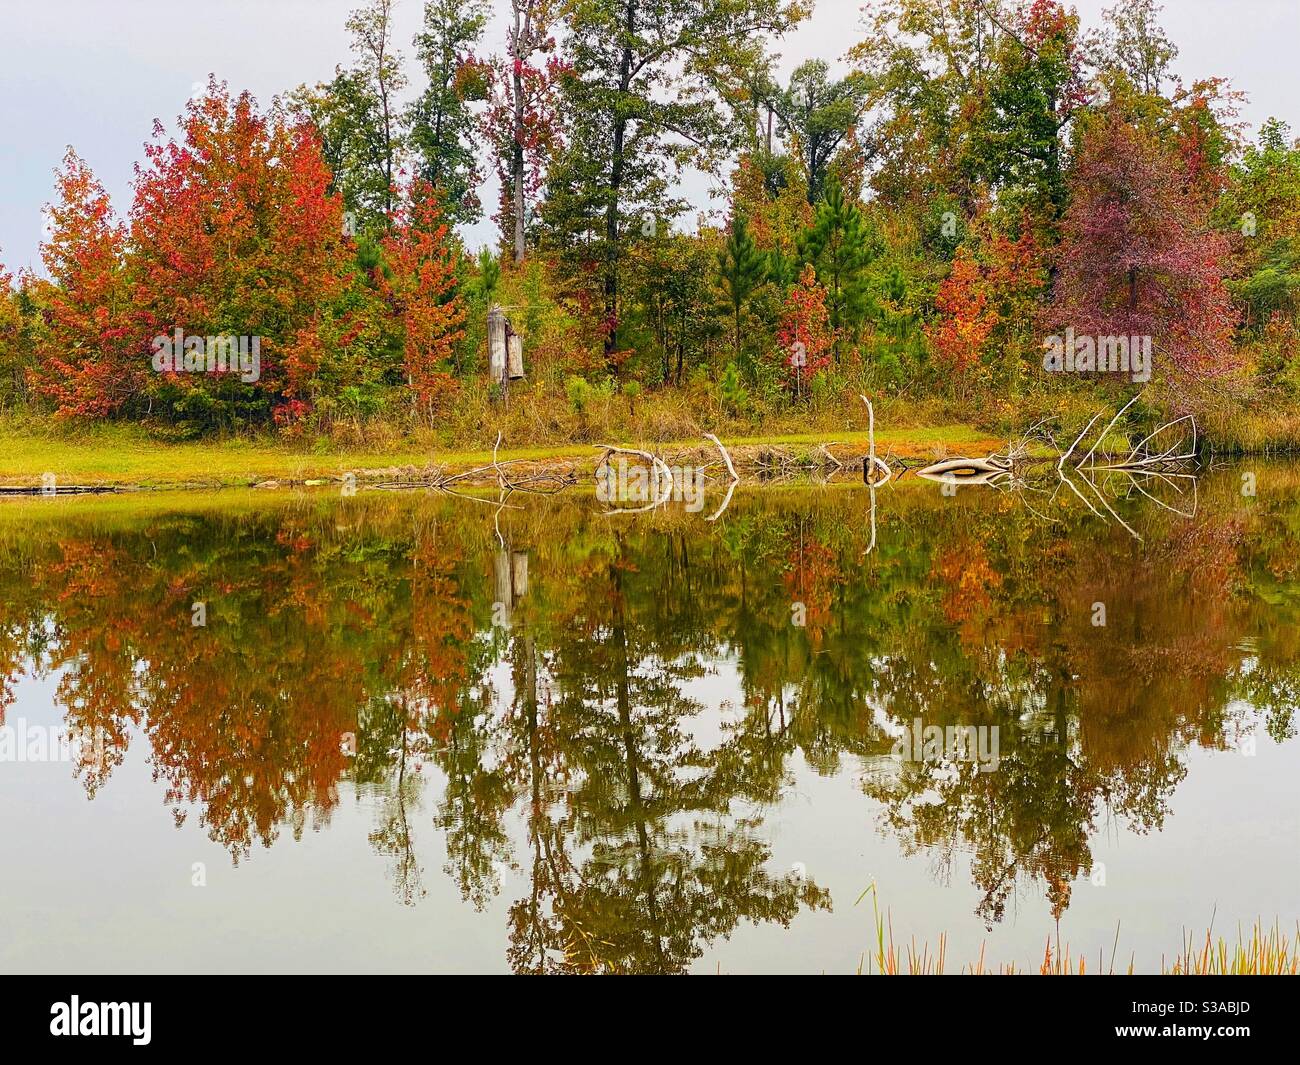 Trees with changing leaves reflecting on a lake Stock Photo